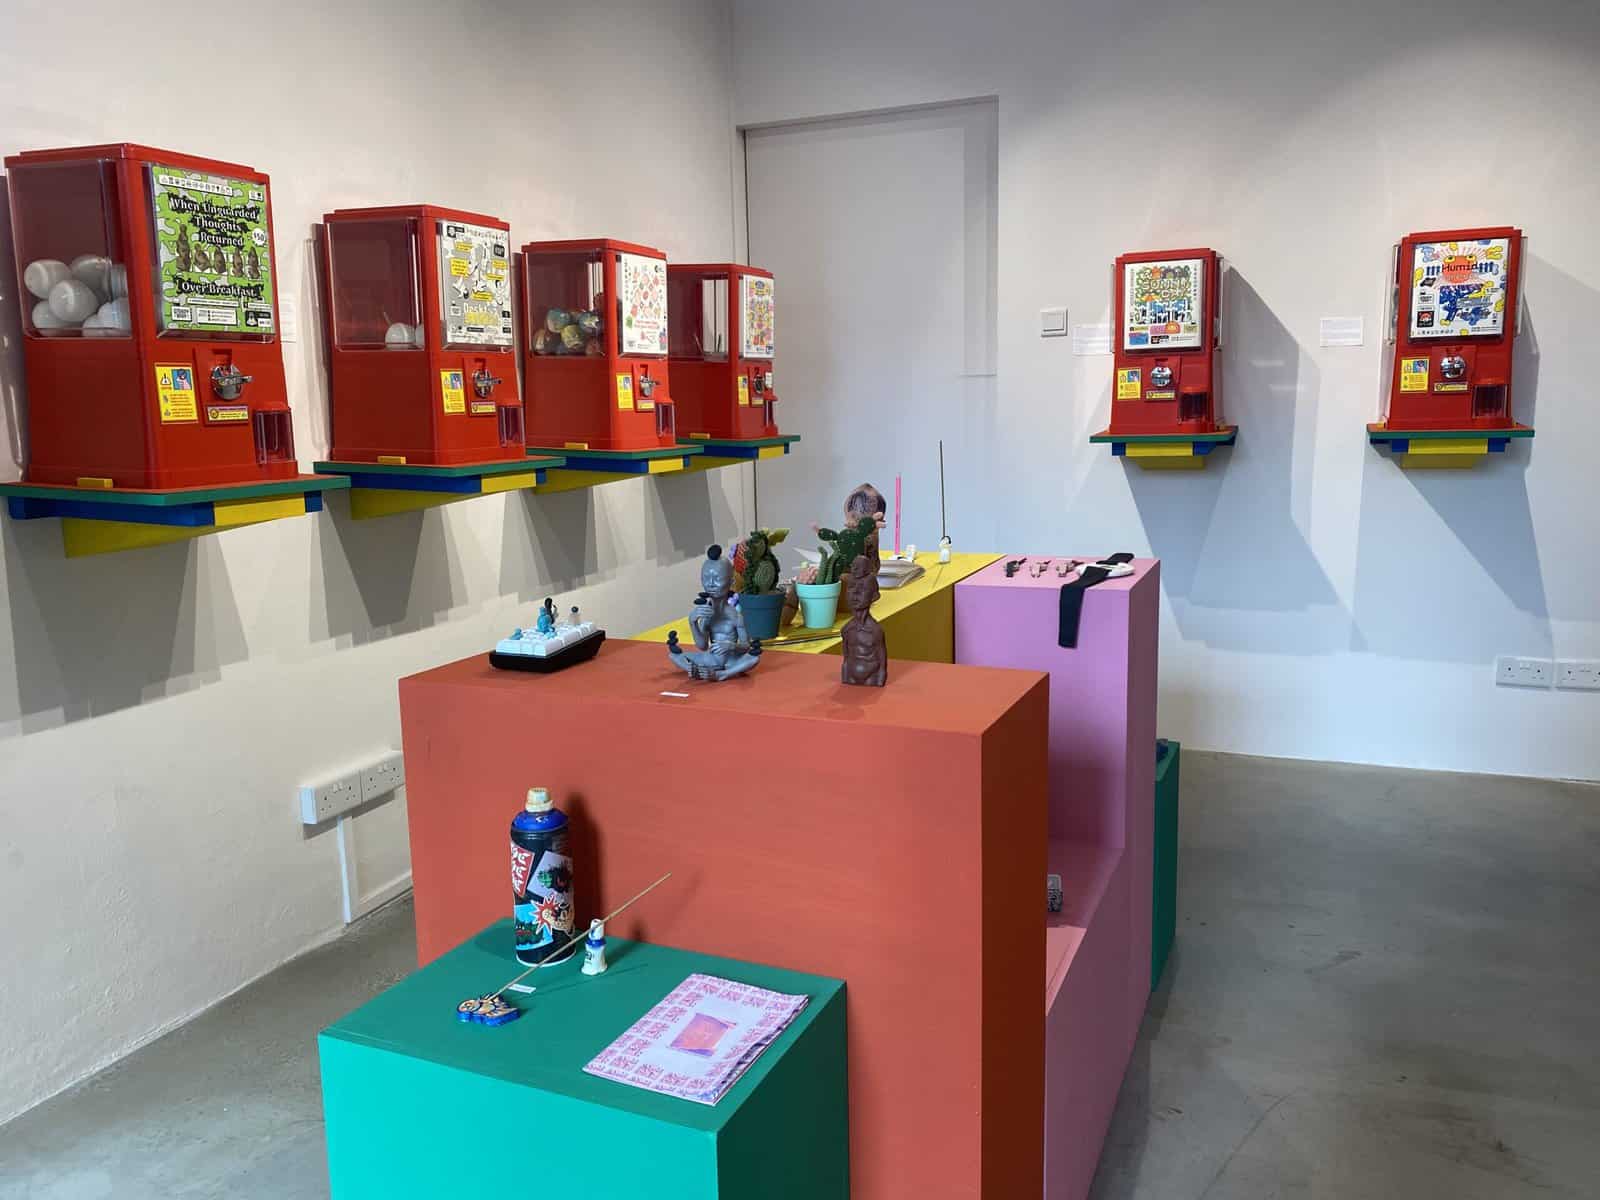 Exhibition view of Let's Play Ball featuring Gachapon capsule vending machines